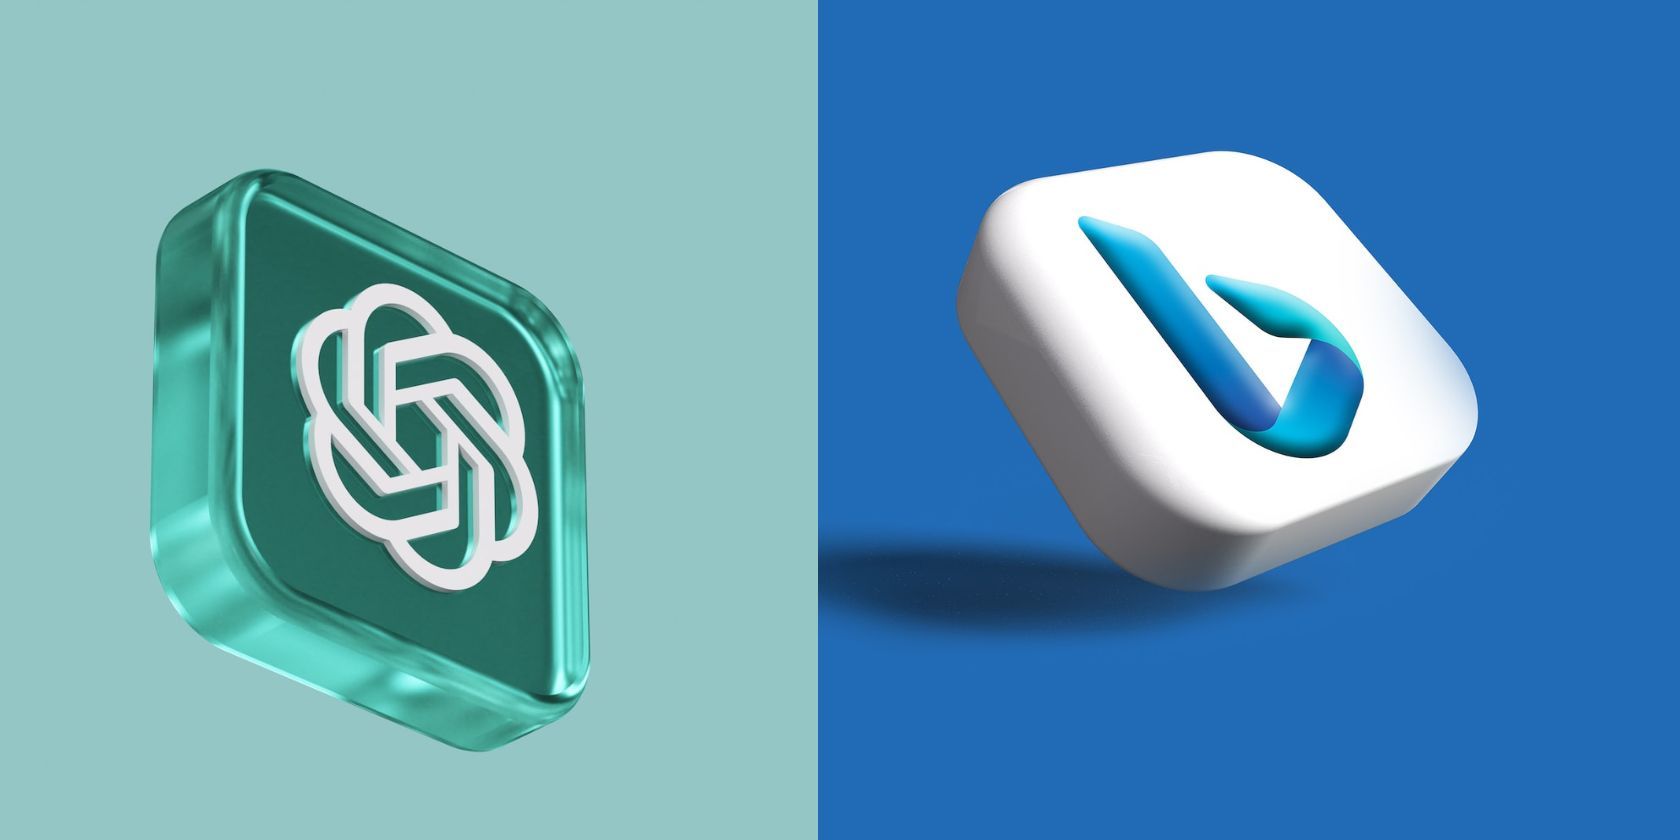 The ChatGPT and Bing Logo Side by Side on Blue and Green Background